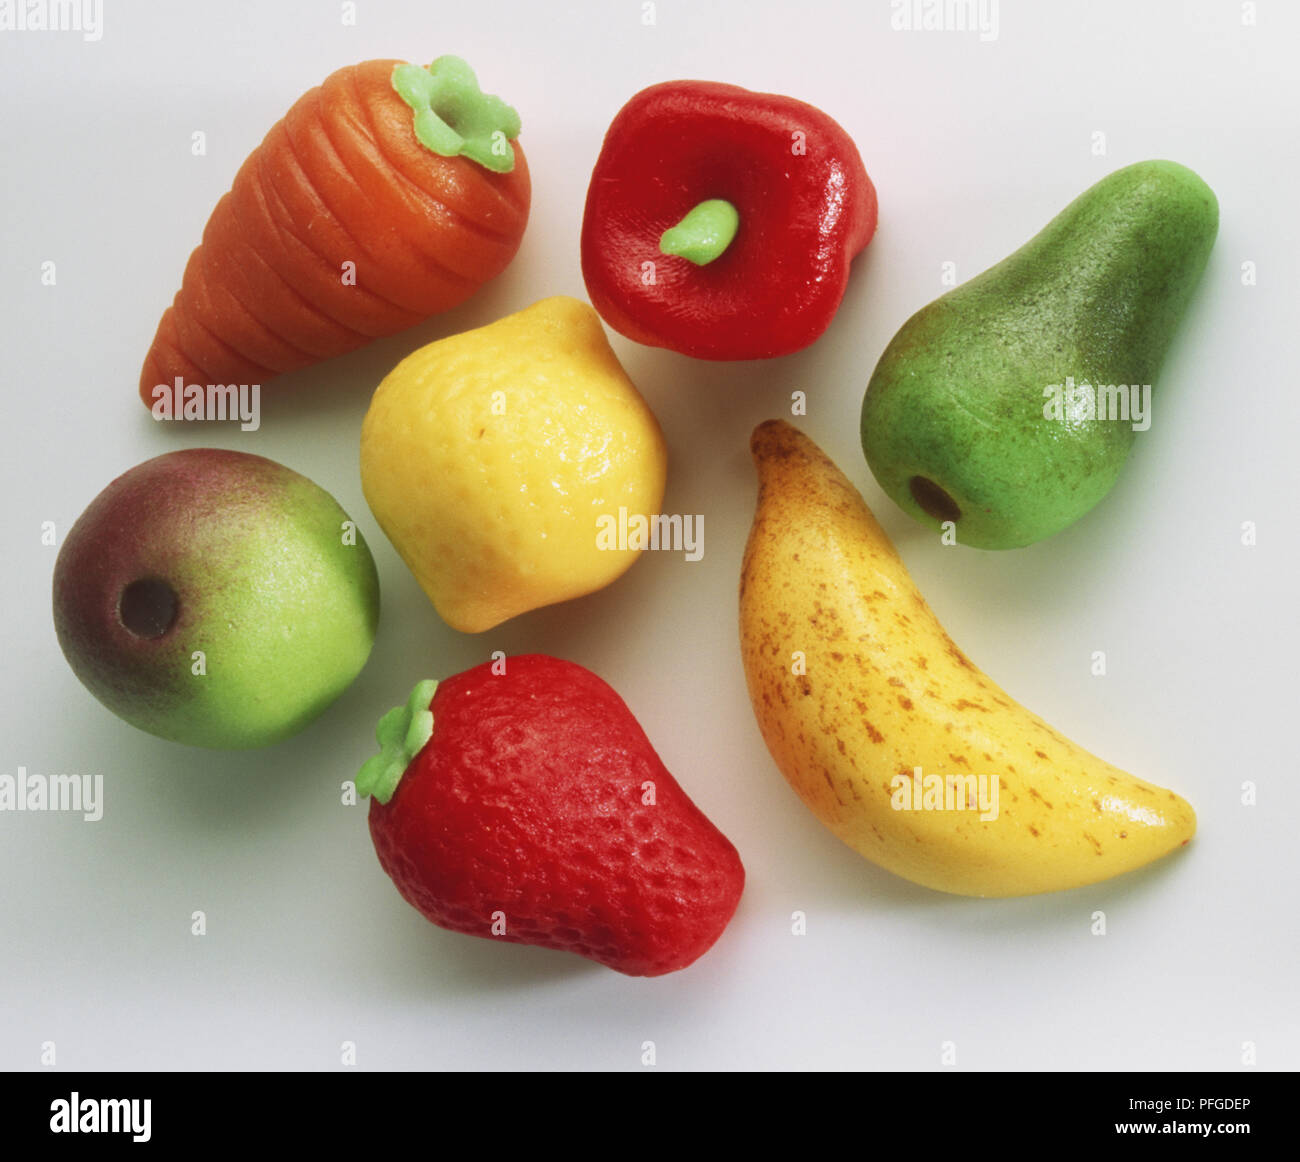 Colourful selection of marzipan sweets shaped as different fruit and vegetables, close up Stock Photo